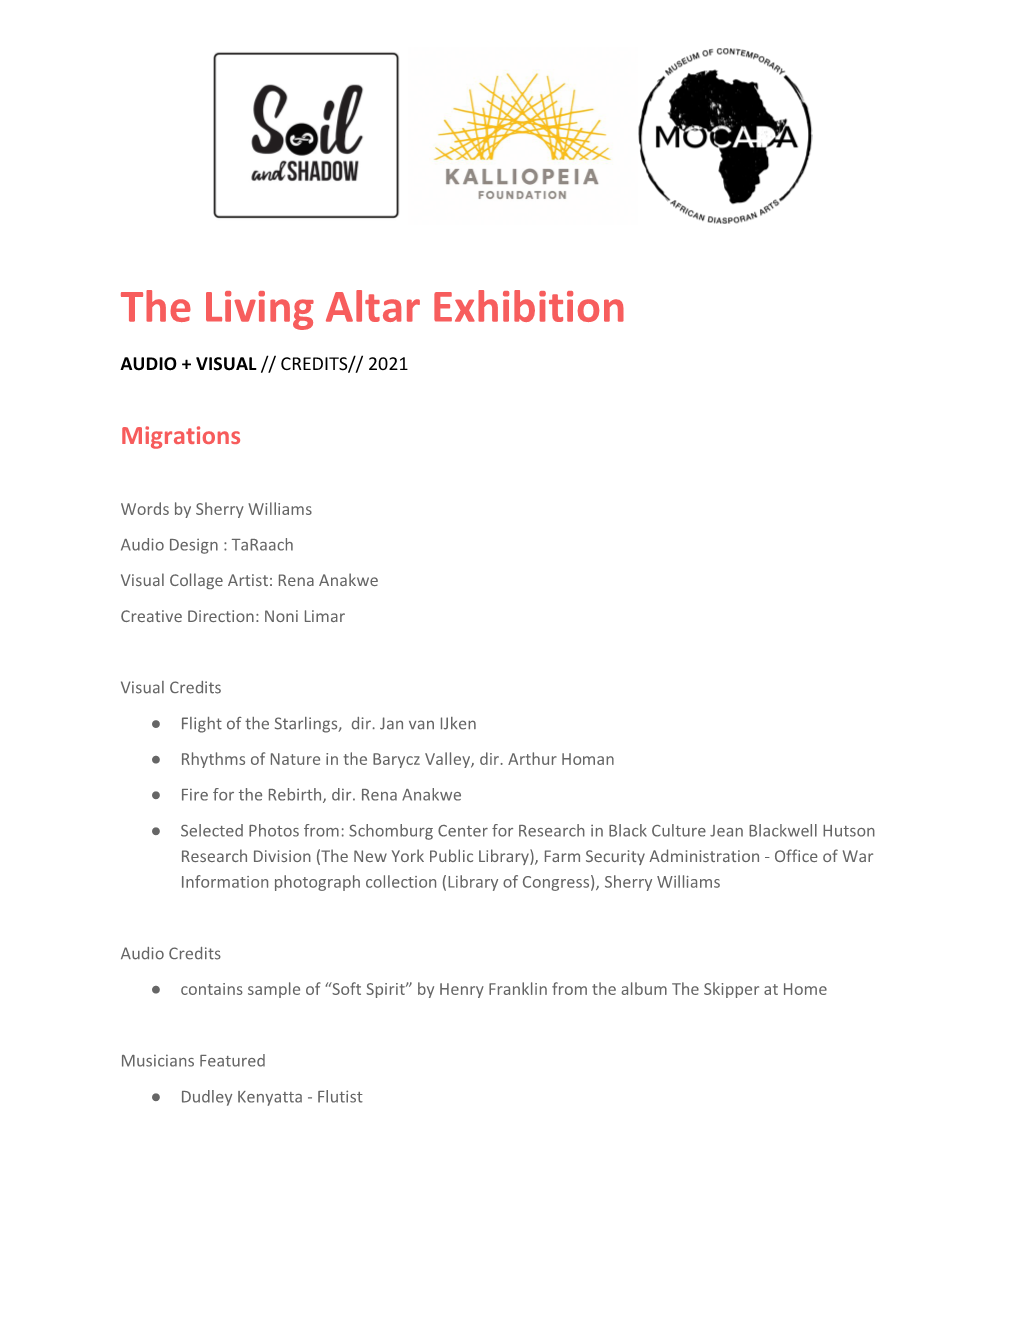 The Living Altar Exhibition